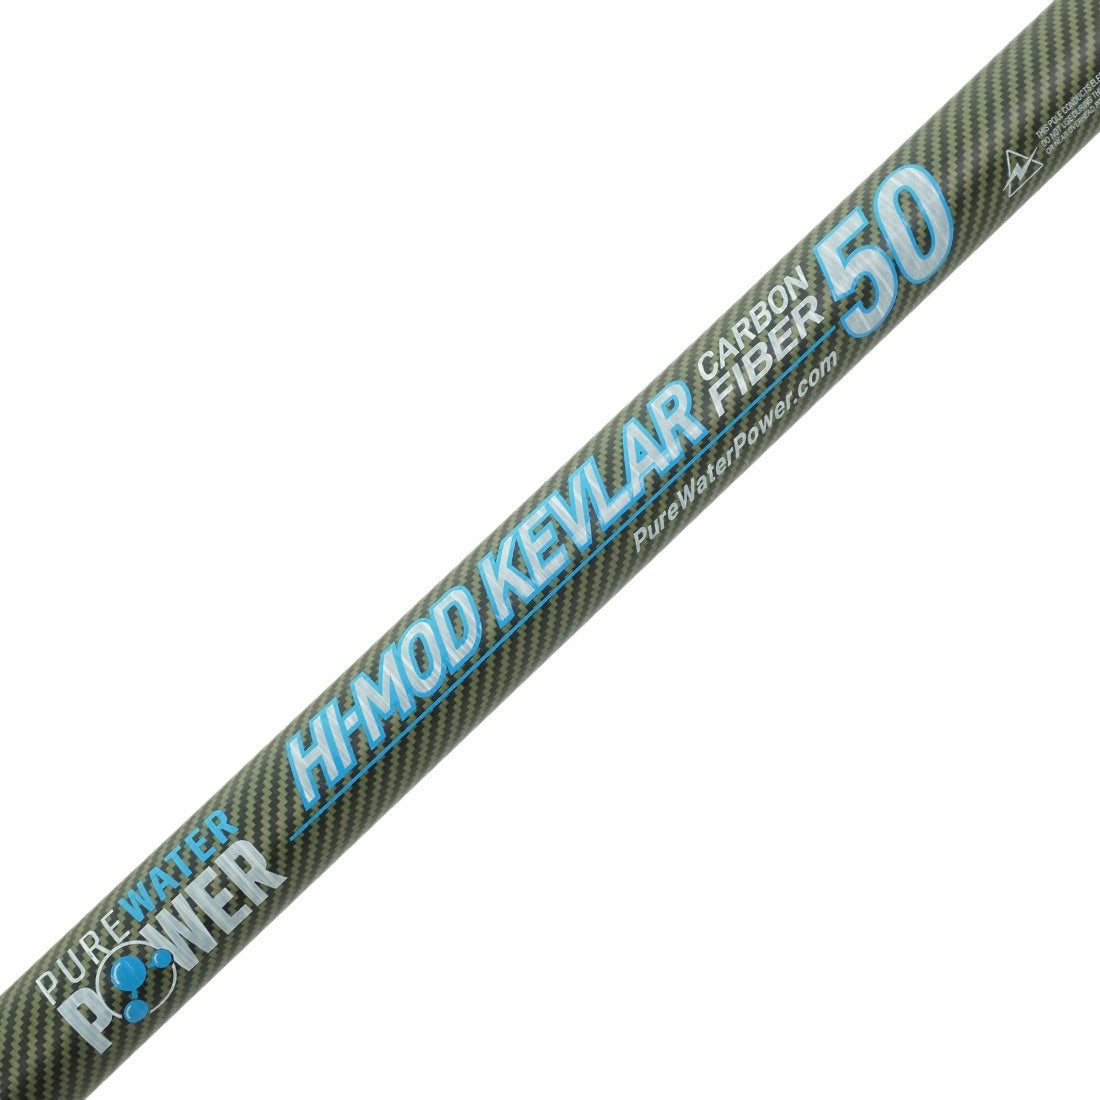 PWP Kevlar Water Fed Pole, Water Fed Poles